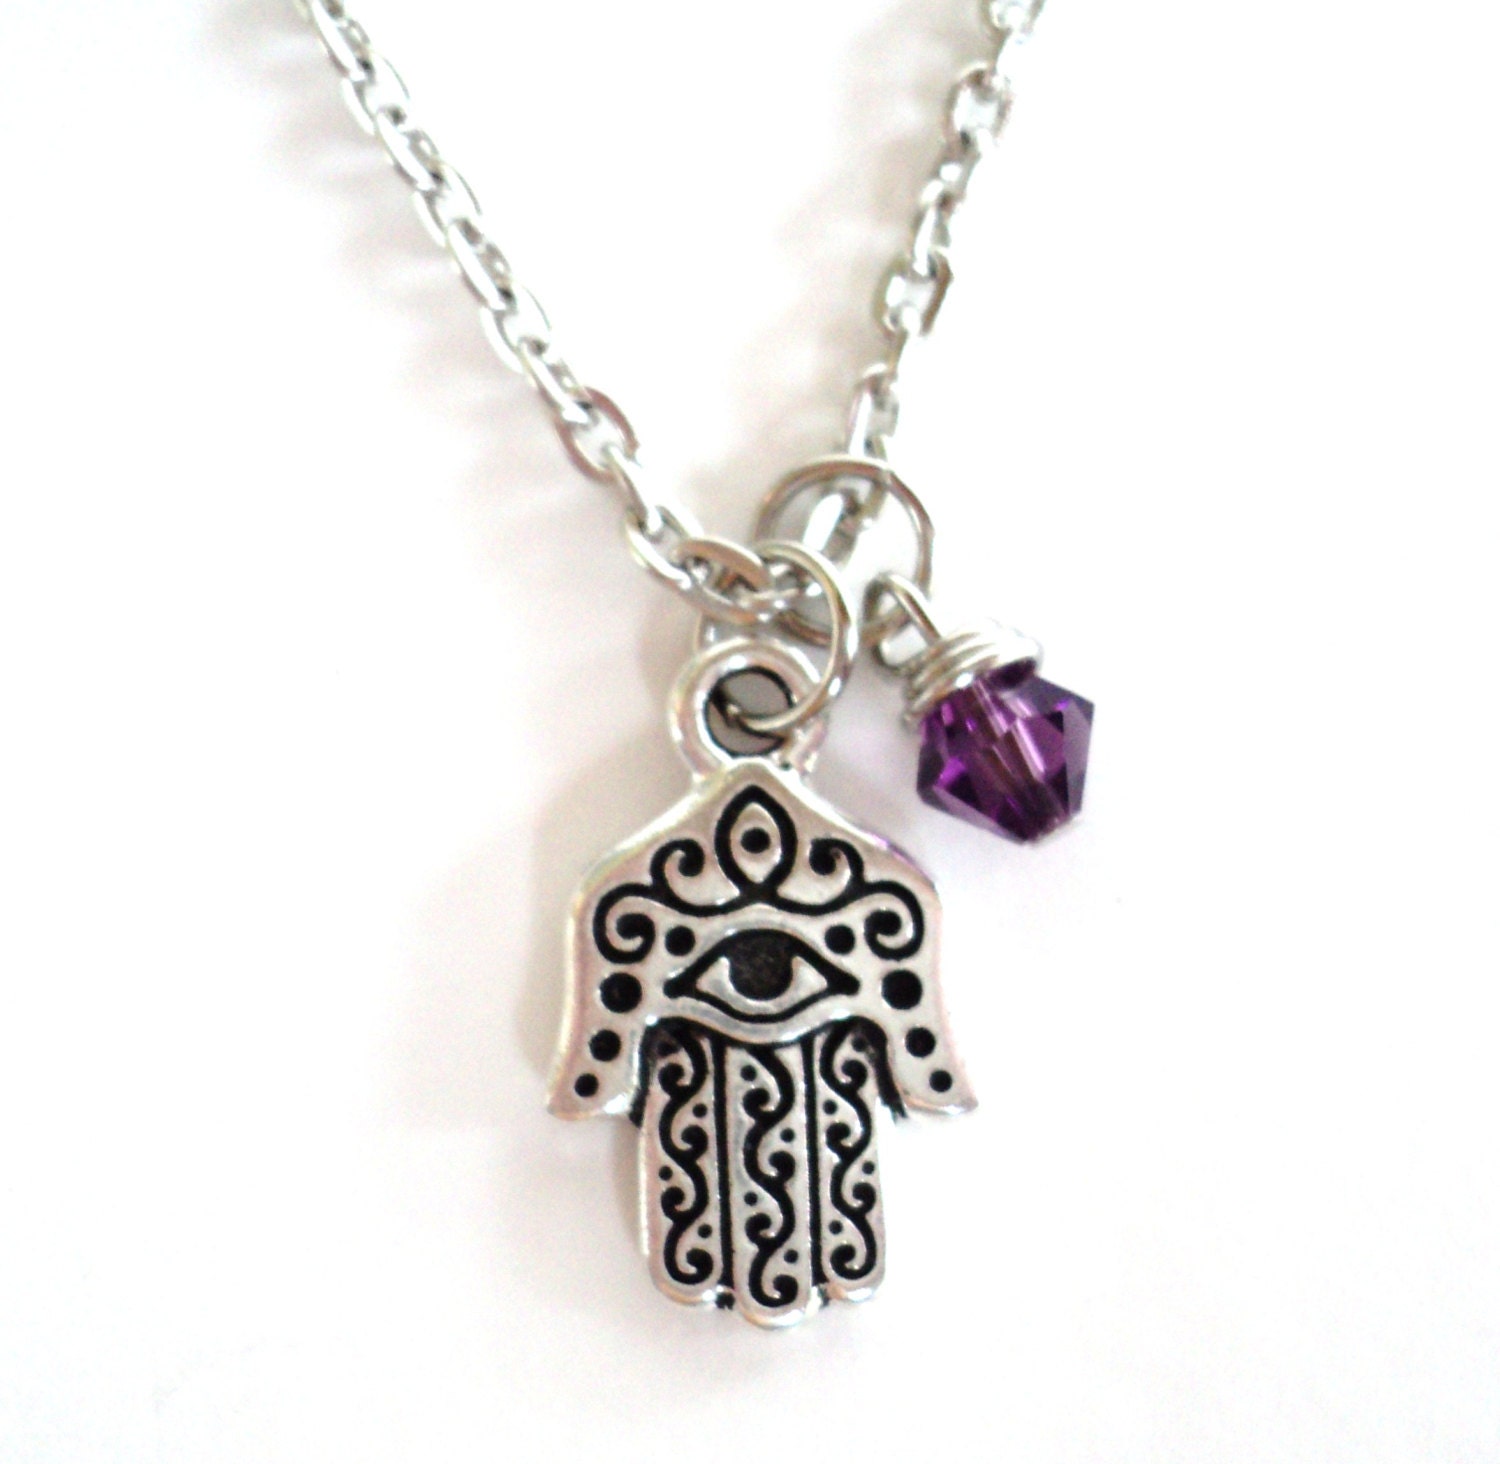 Hamsa Evil Eye Necklace Protection Jewelry by BohemianEarthDesigns